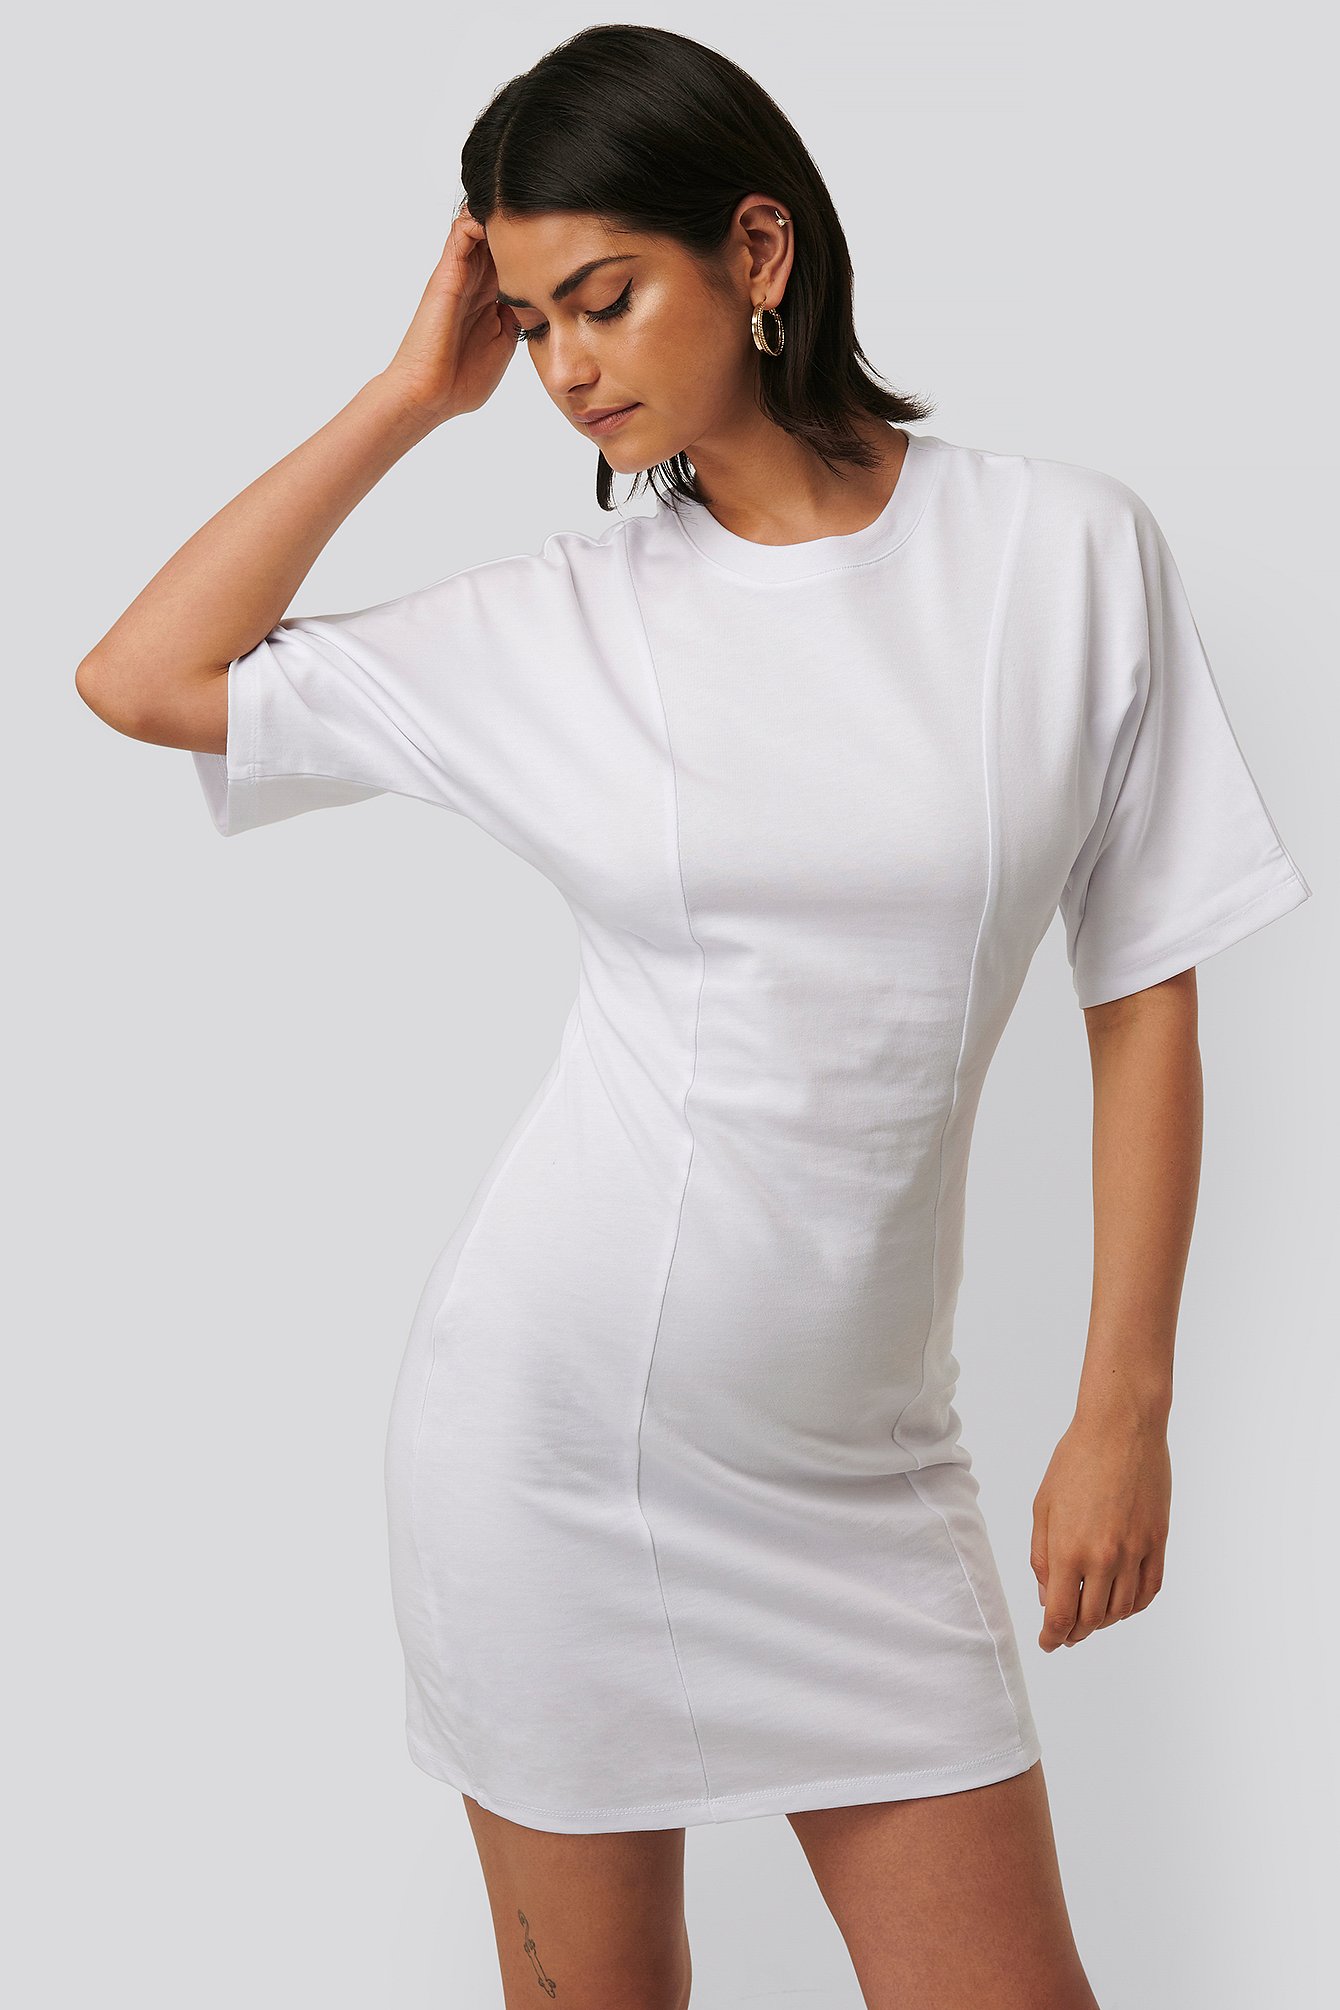 White Fitted T-shirt Dress